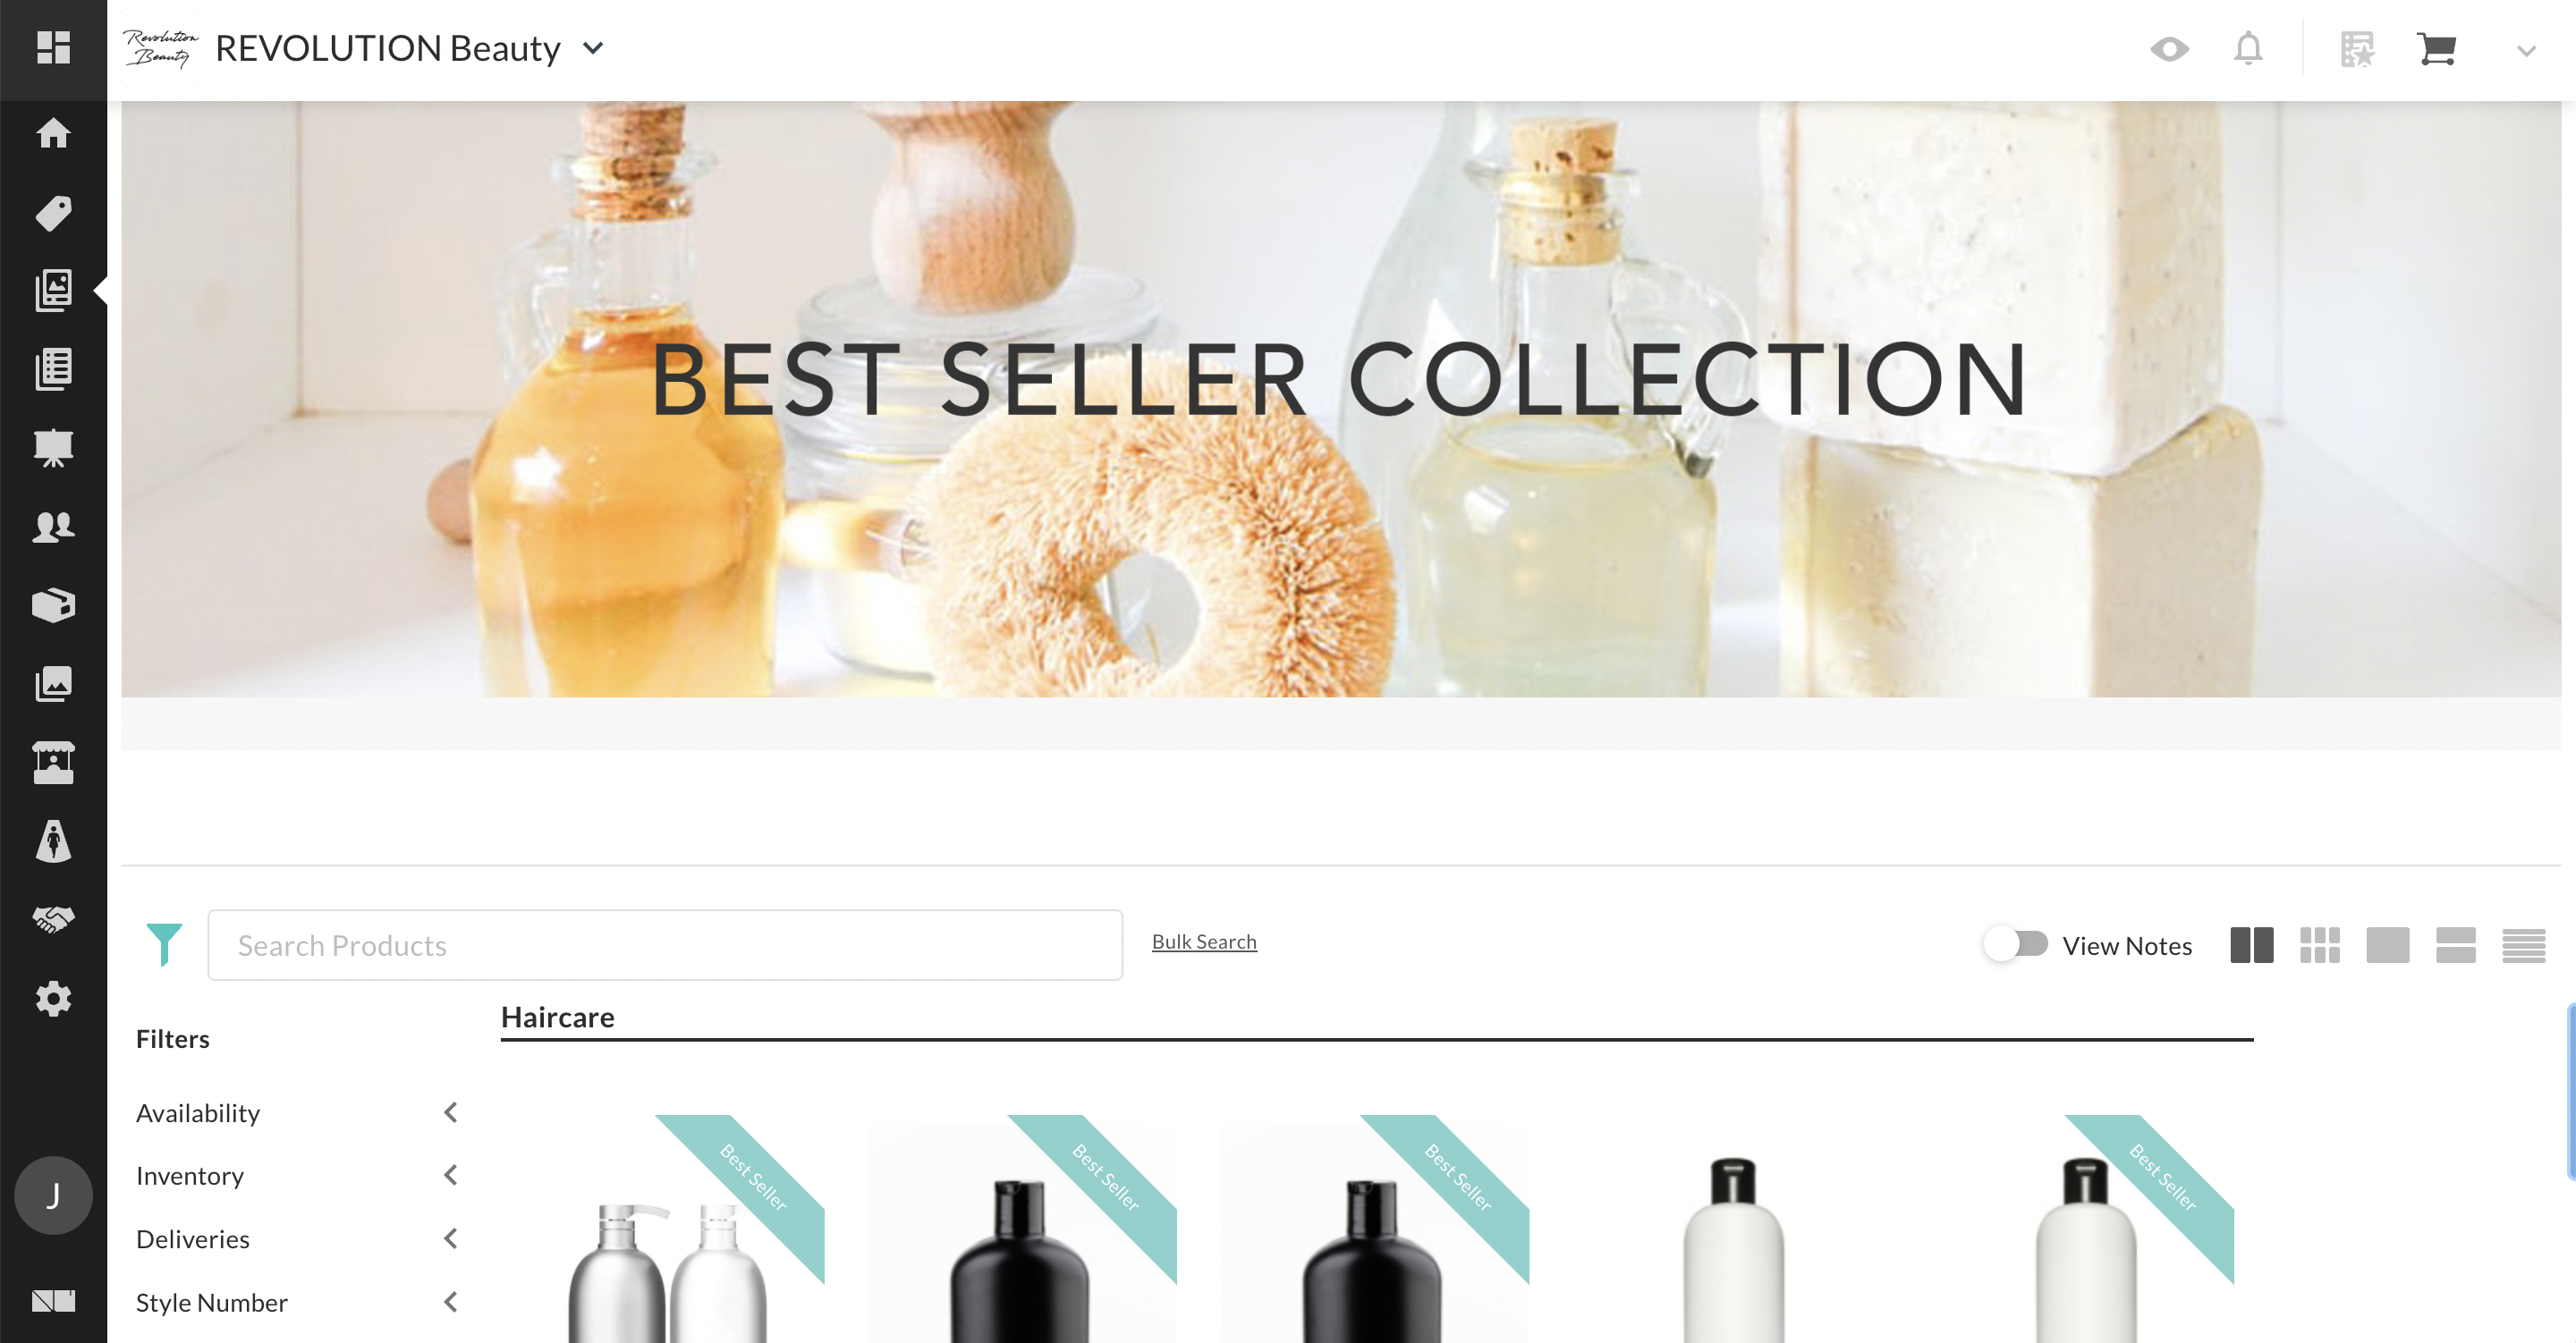 NuORDER-Browse-Products-Linesheets-Best-Sellers.png